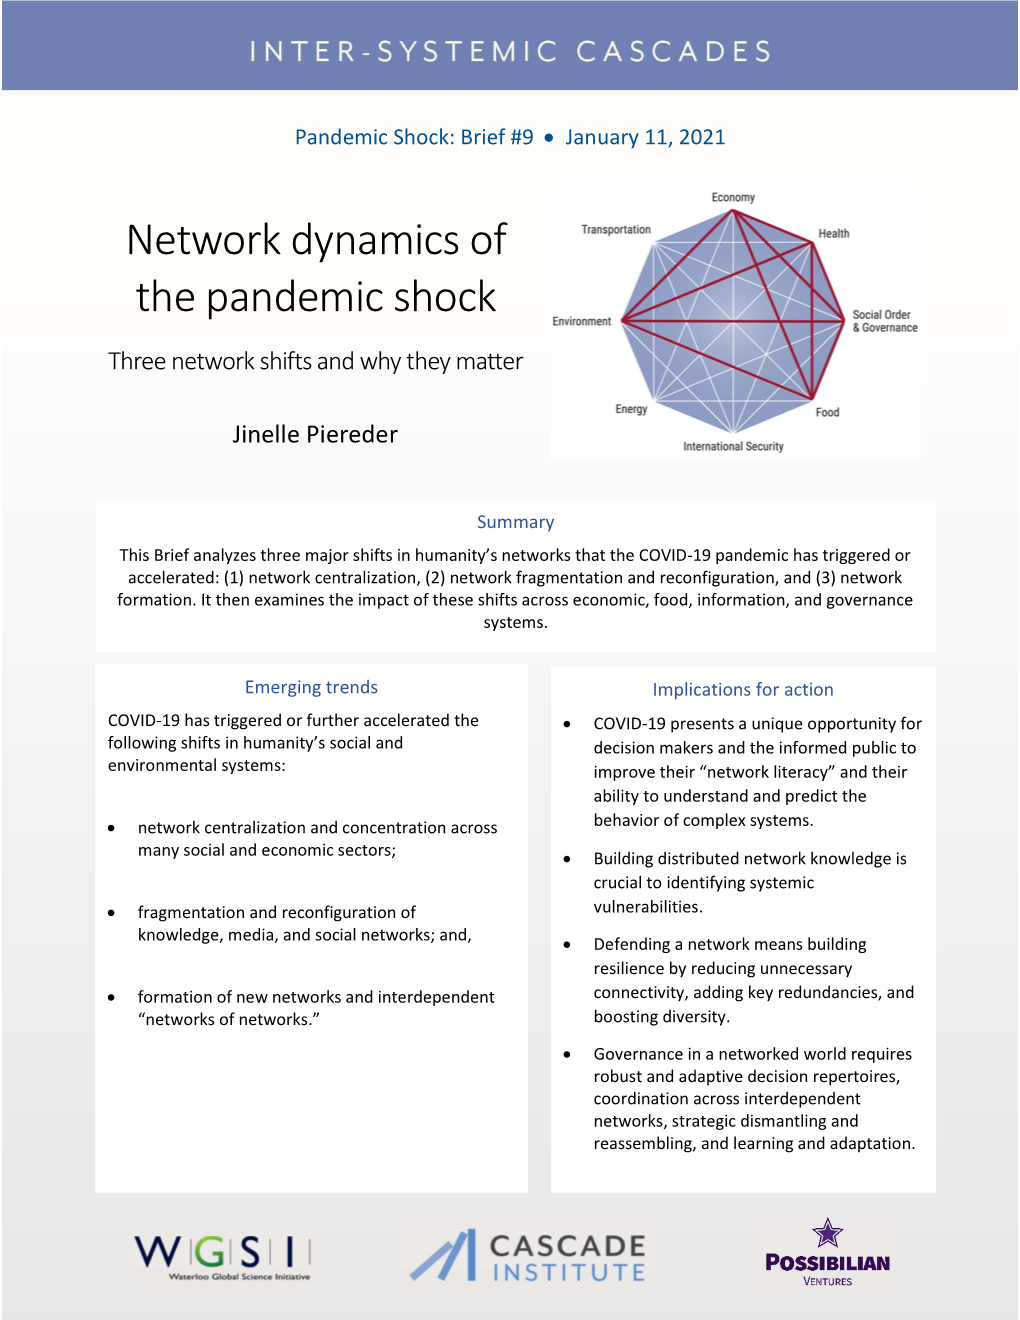 Network Dynamics of the Pandemic Shock